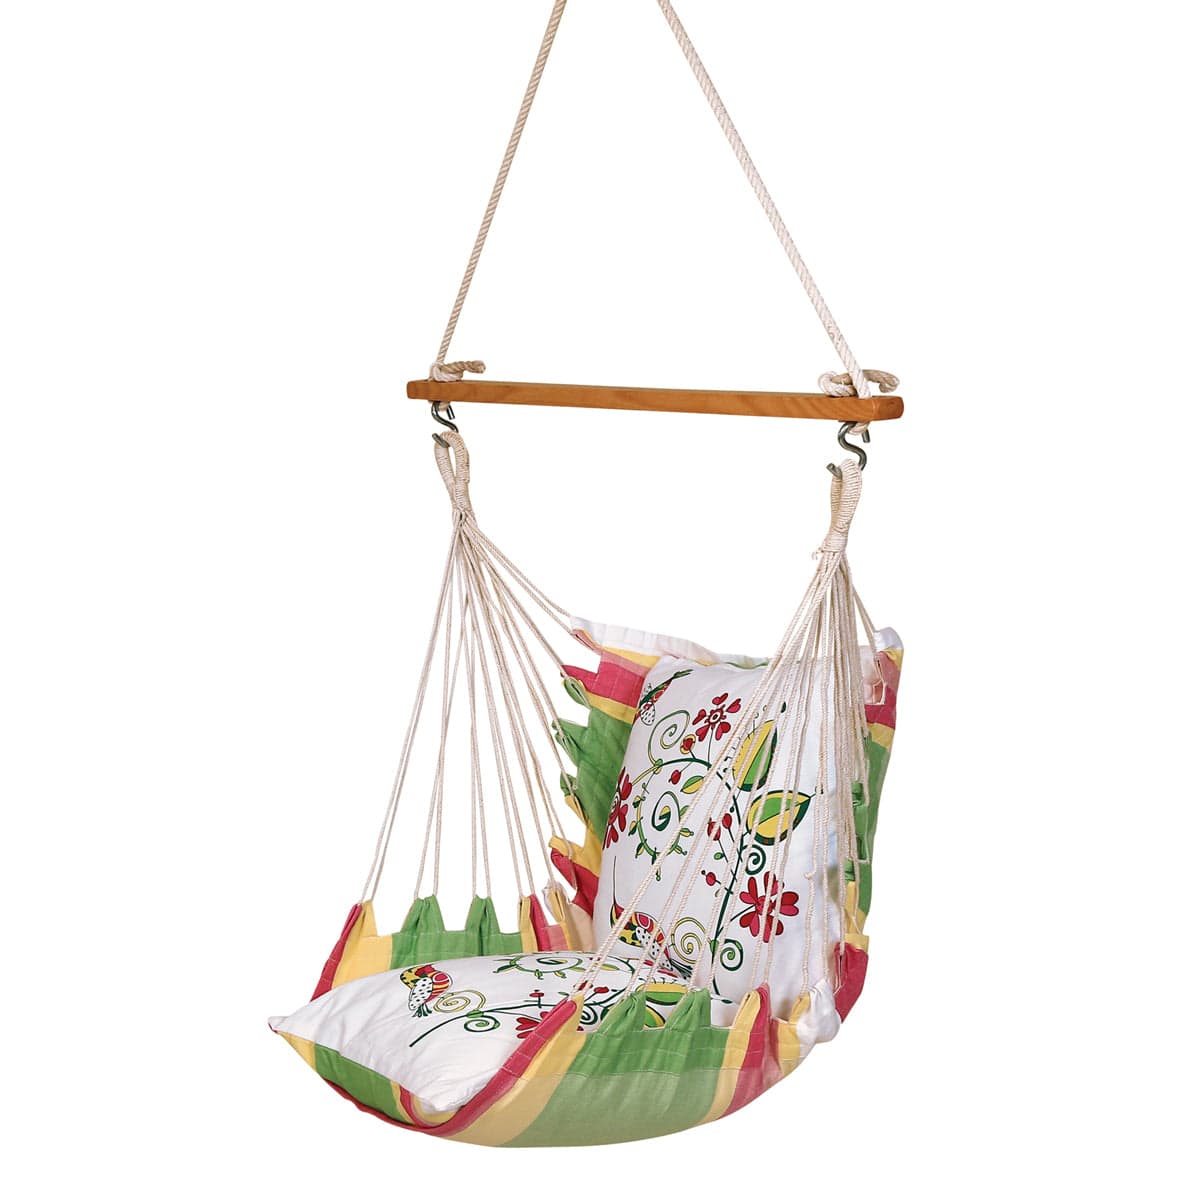 Casual Swing Chair With Printed Cushions, Weight Capacity 113Kg- 100W X 130H cm